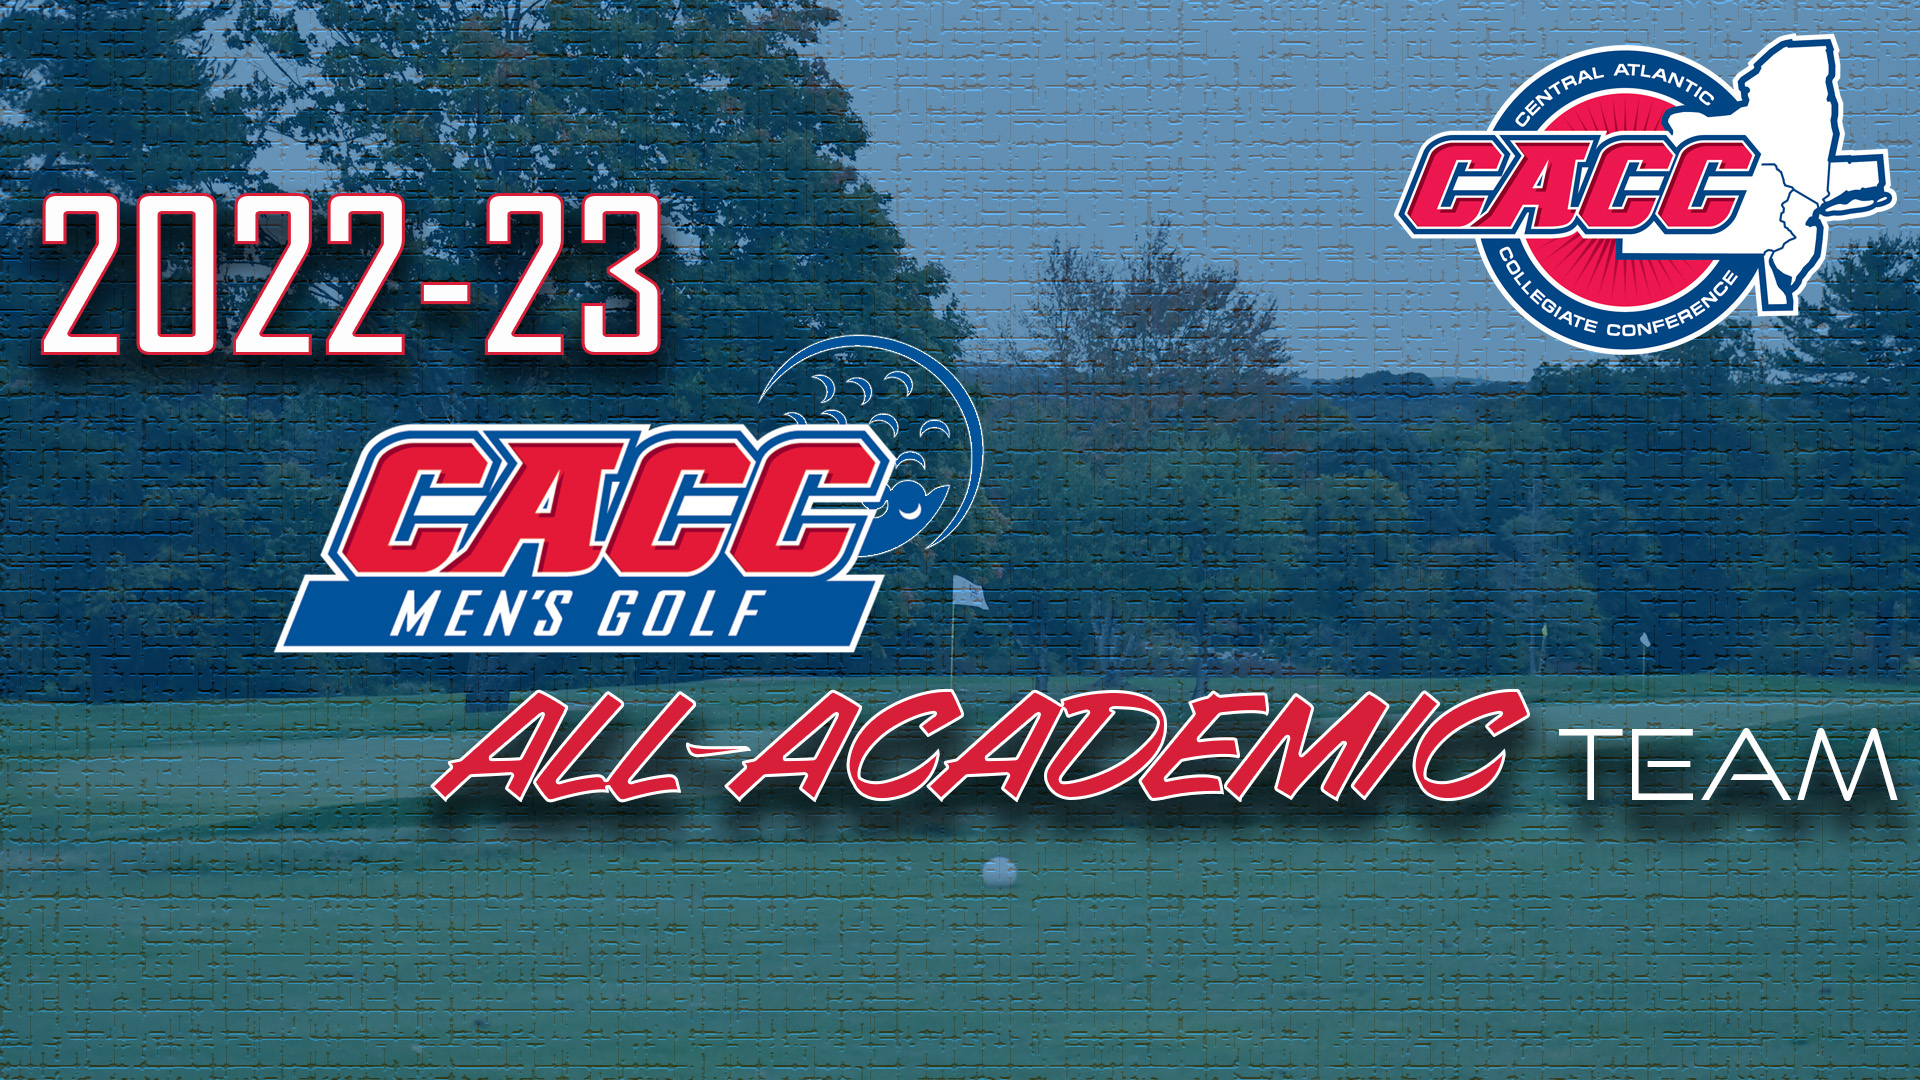 18 S-As Named to 2022-23 CACC Men's Golf All-Academic Team